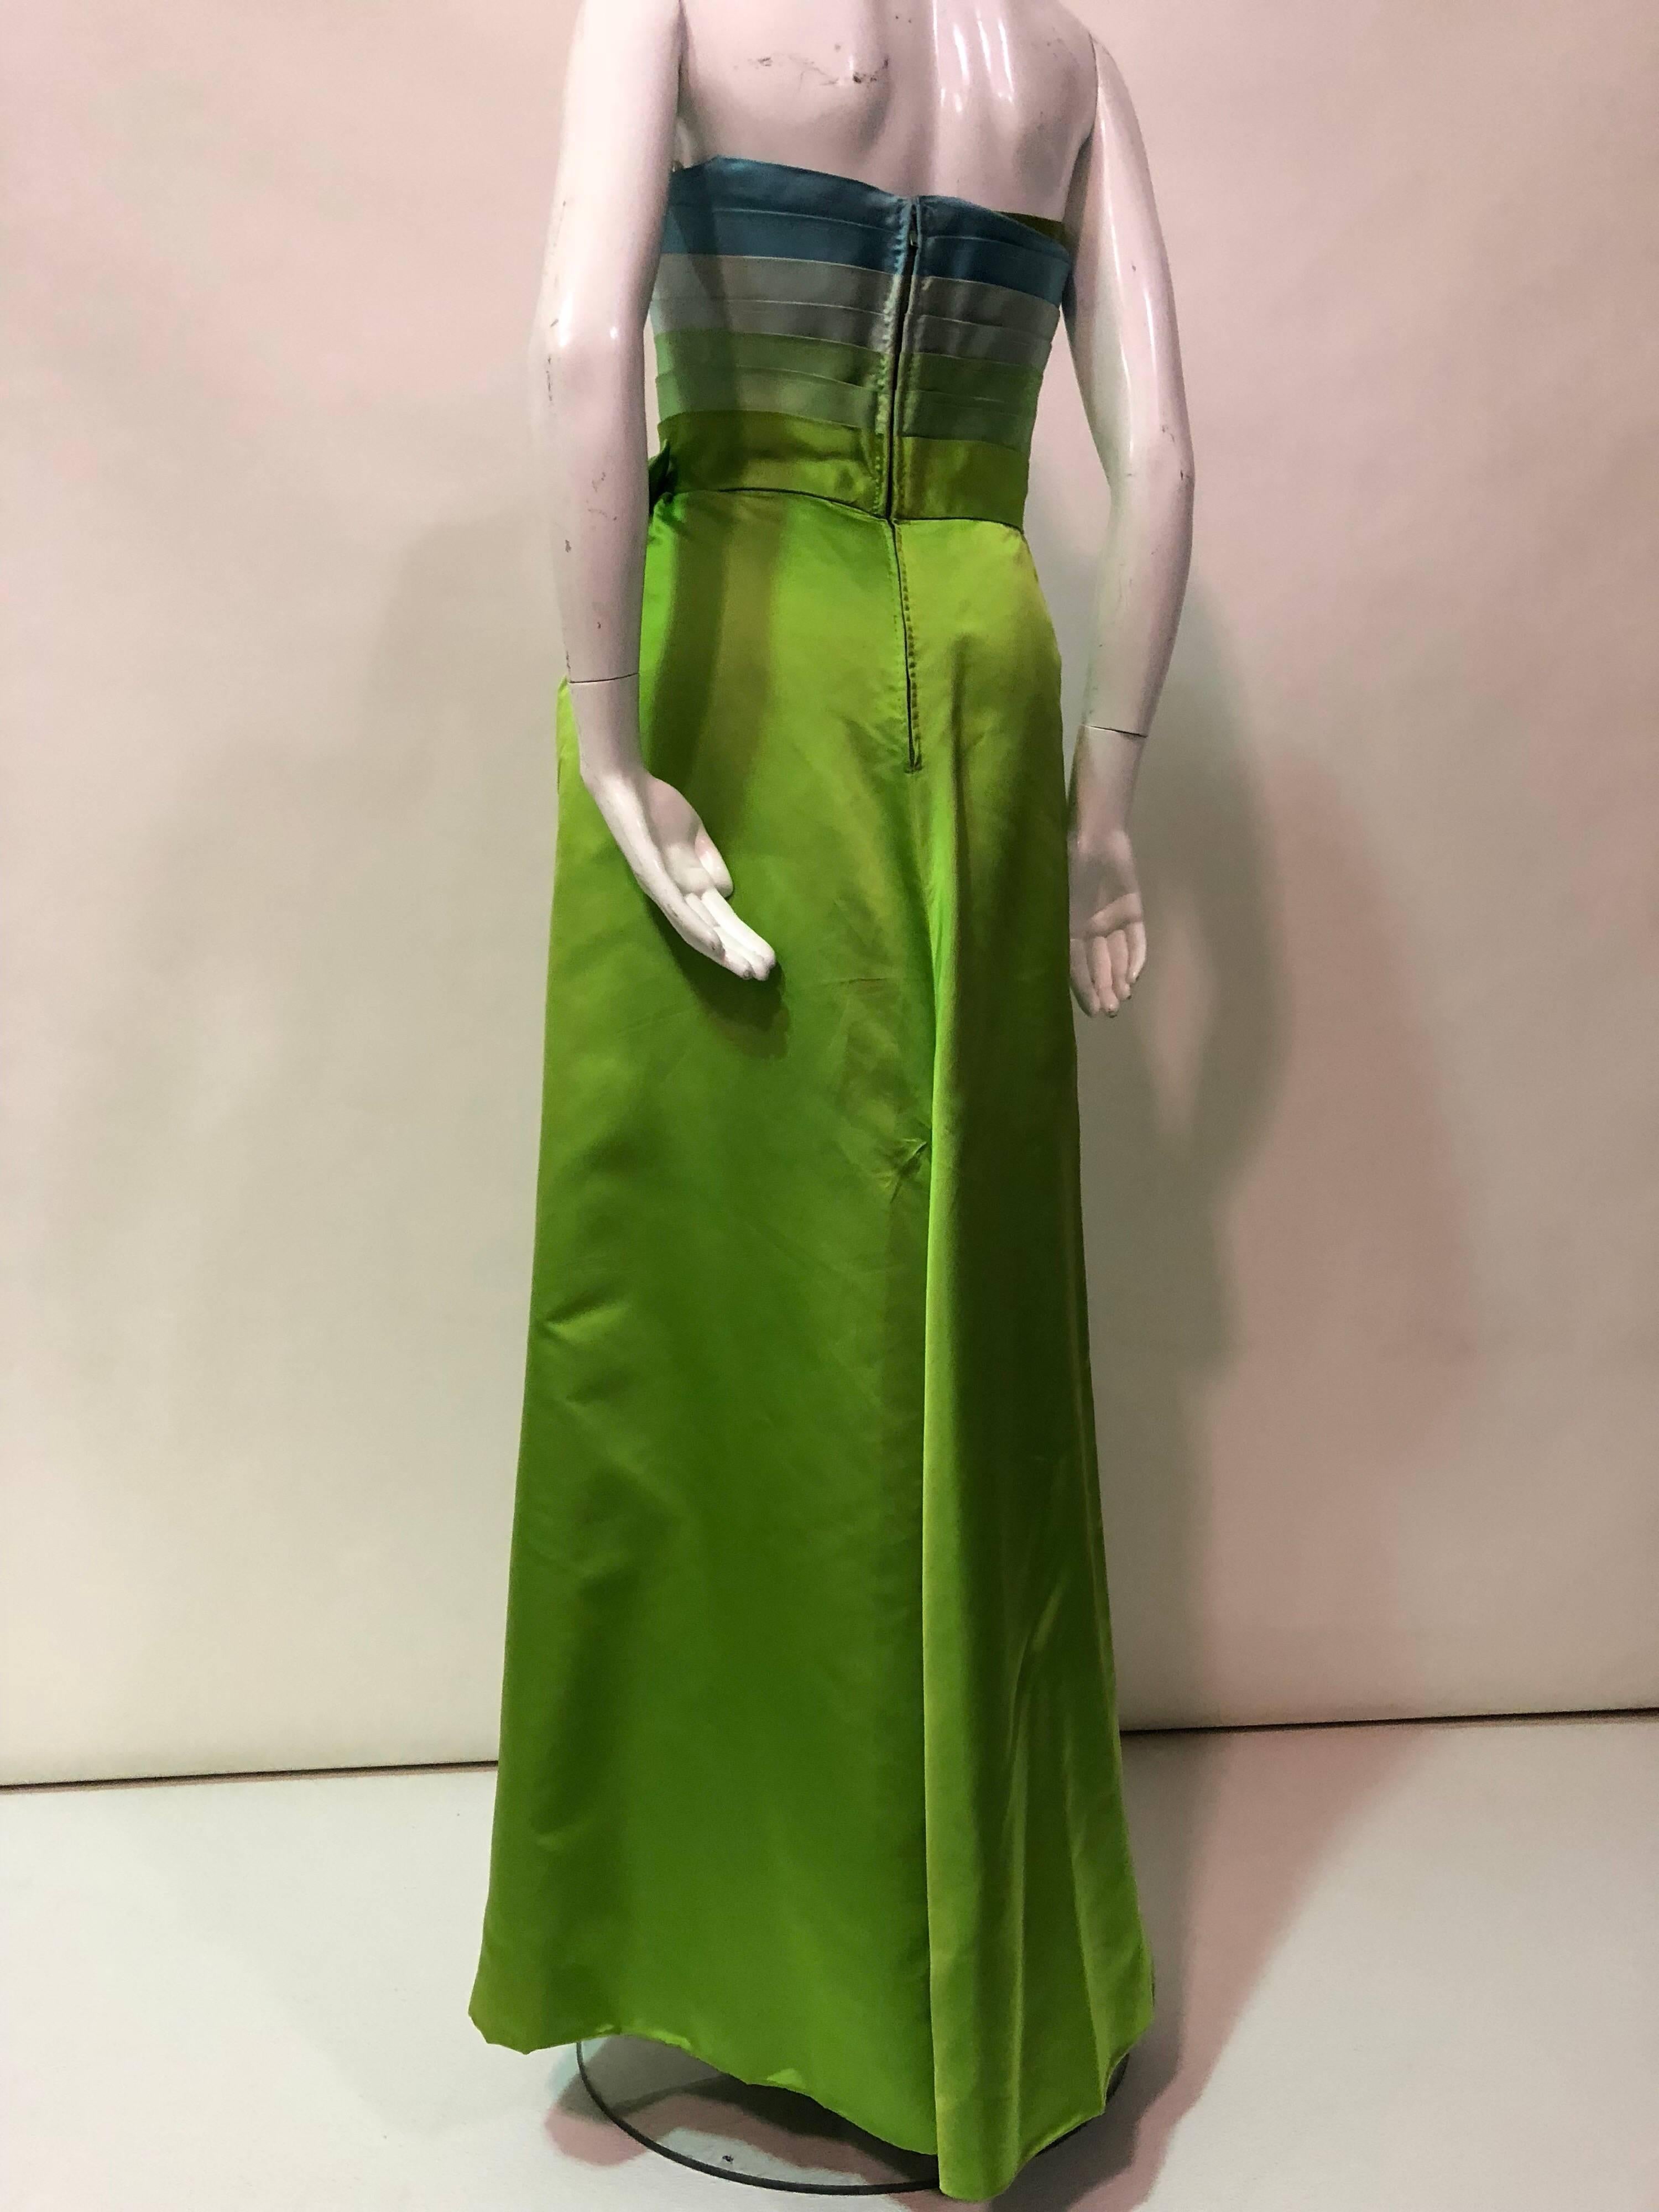 Philip Hulitar Satin Gown with Aqua Turquoise Chartreuse Pleated Bodice, 1950s  2